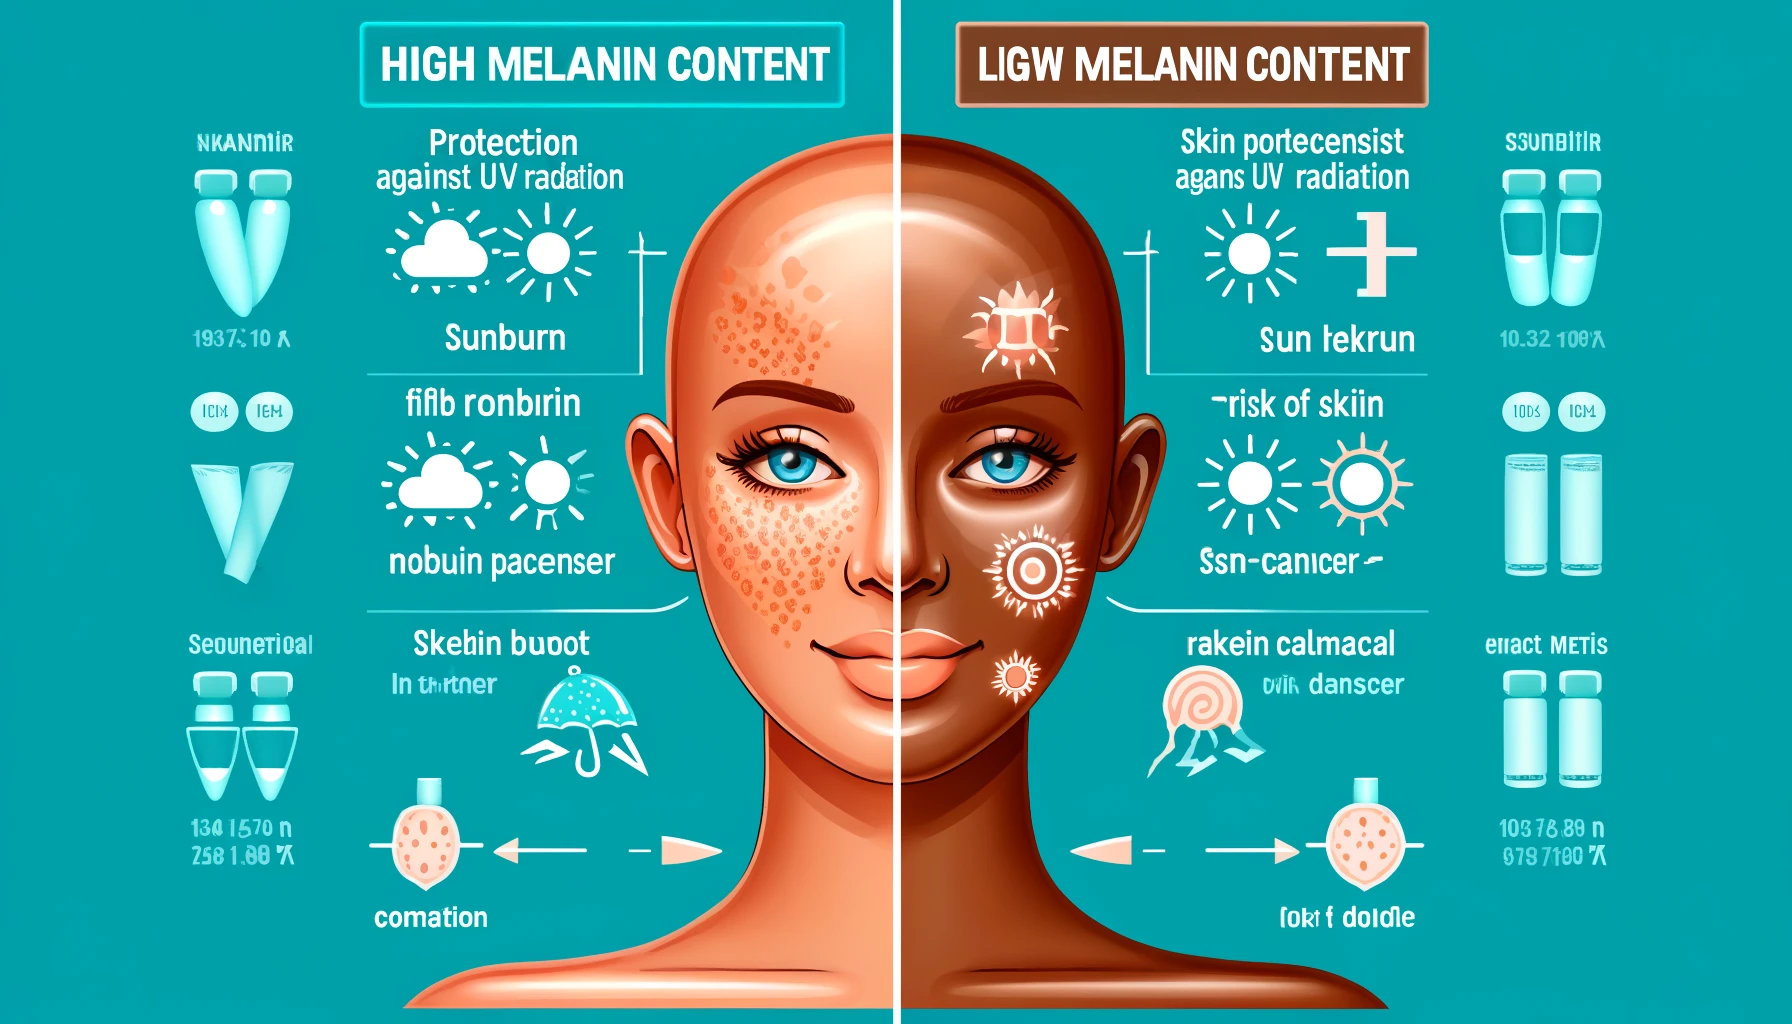 An educational illustration showing the effects of melanin levels in the skin.